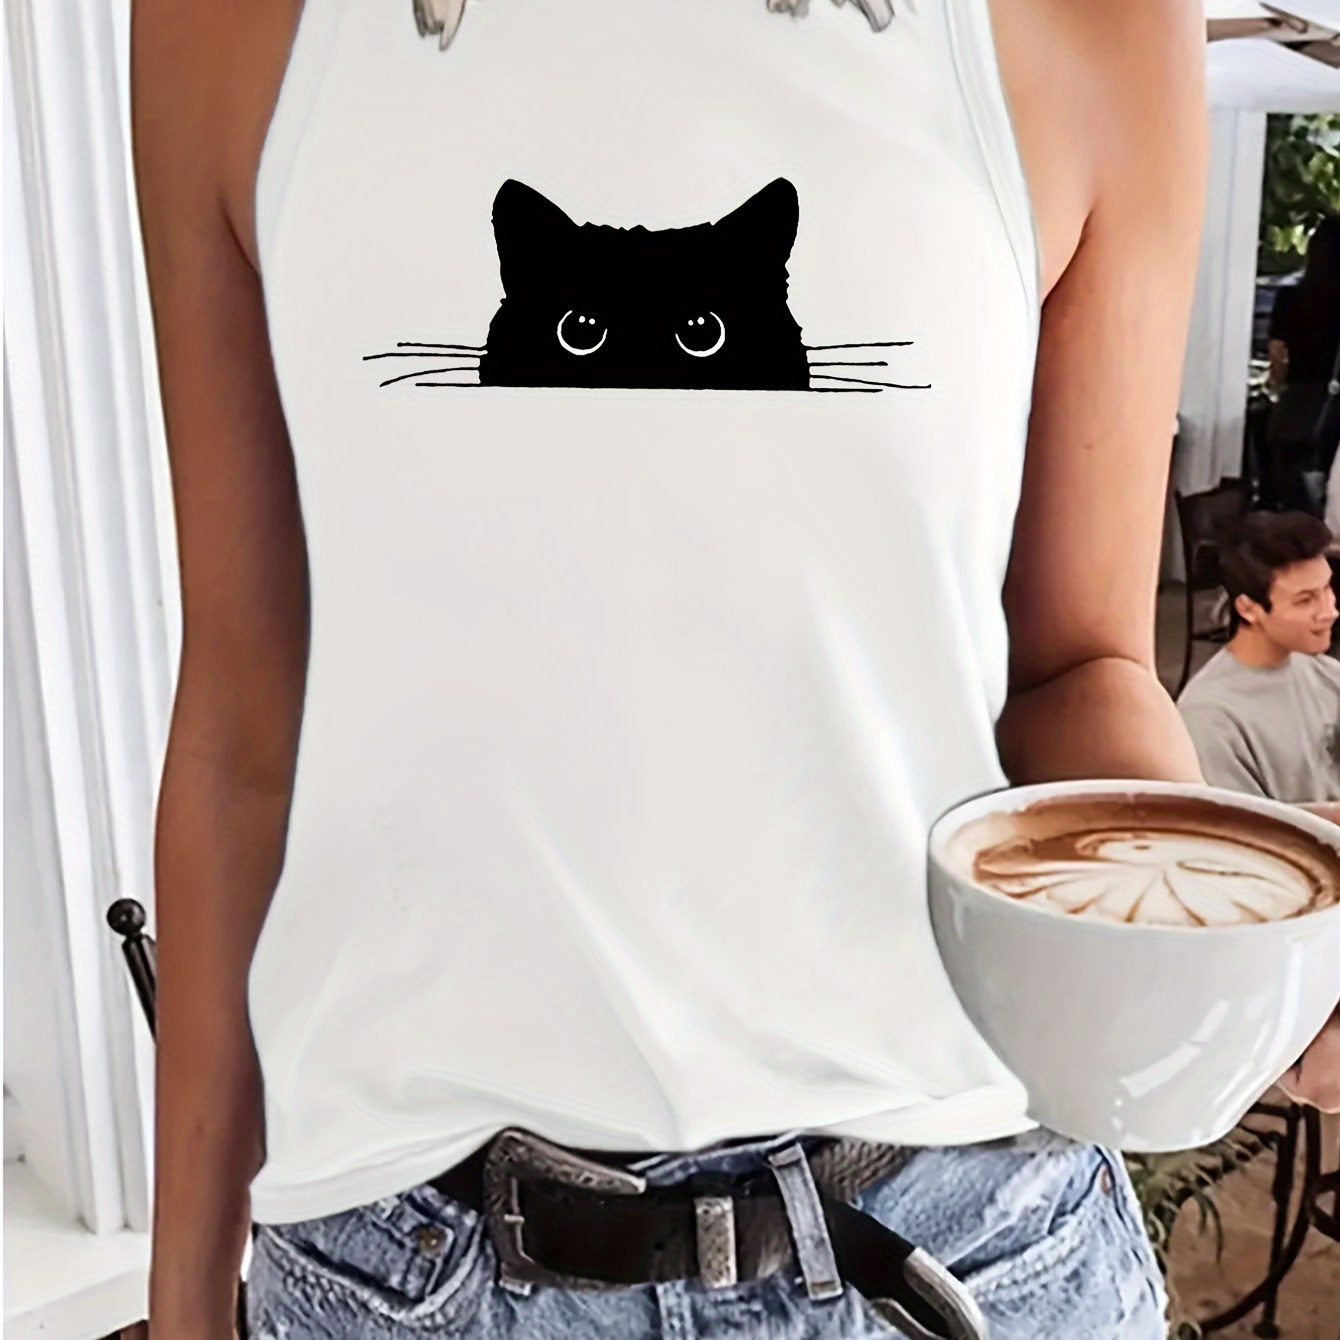 

Cats Graphic Print Tank Top, Sleeveless Crew Neck Casual Top For Summer & Spring, Women's Clothing